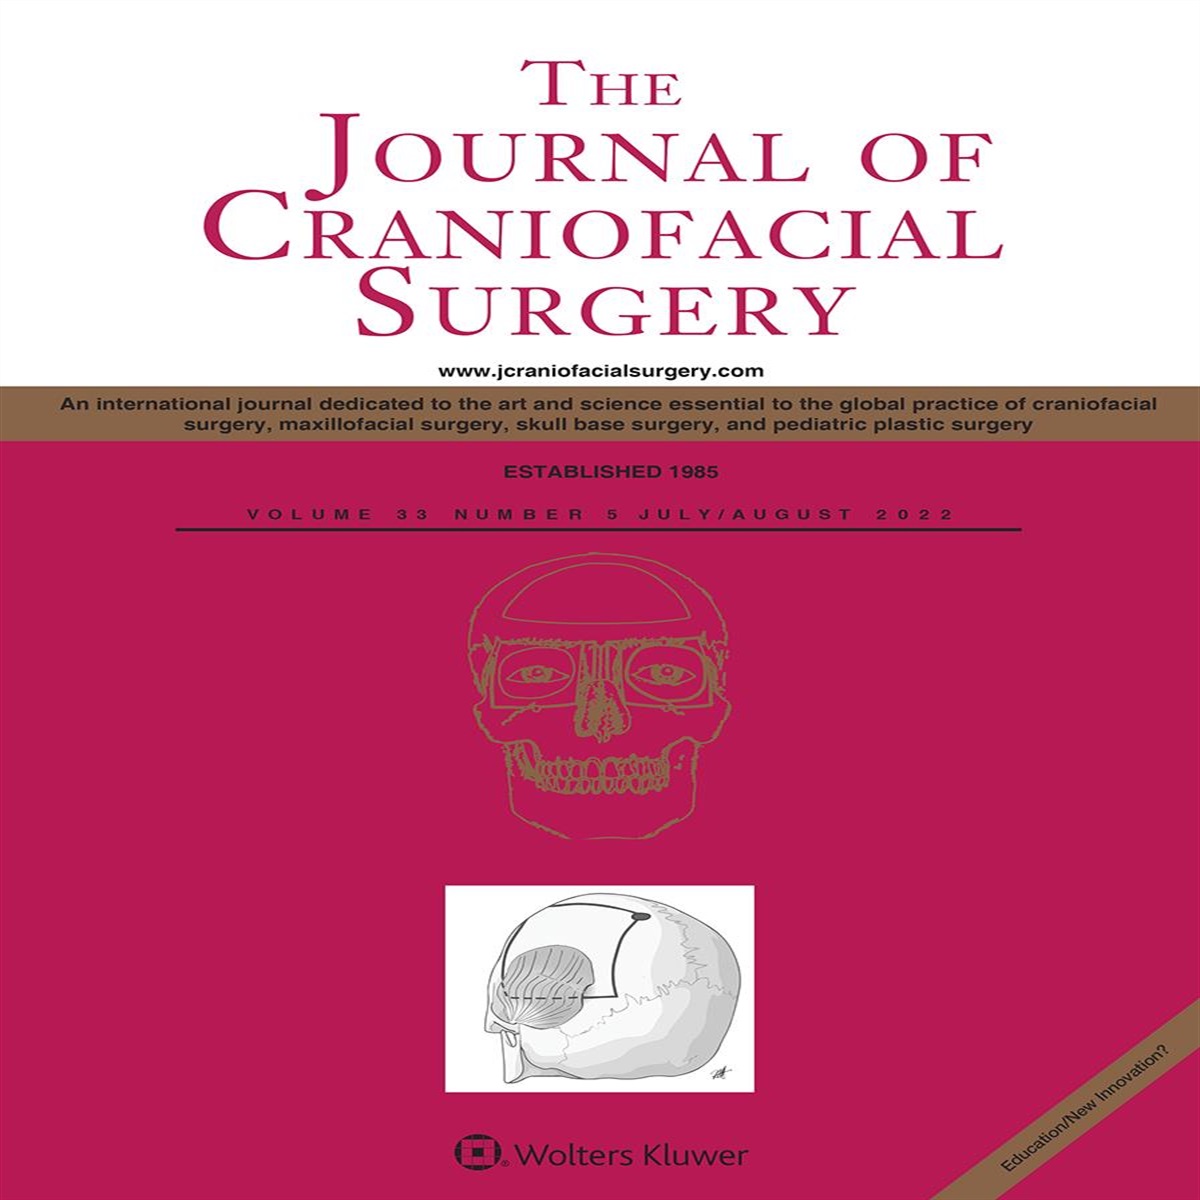 Discussion on: Characteristics and Patterns of Facial Fractures in the Elderly Population in the United States Based on Trauma Quality Improvement Project (TQIP) Data